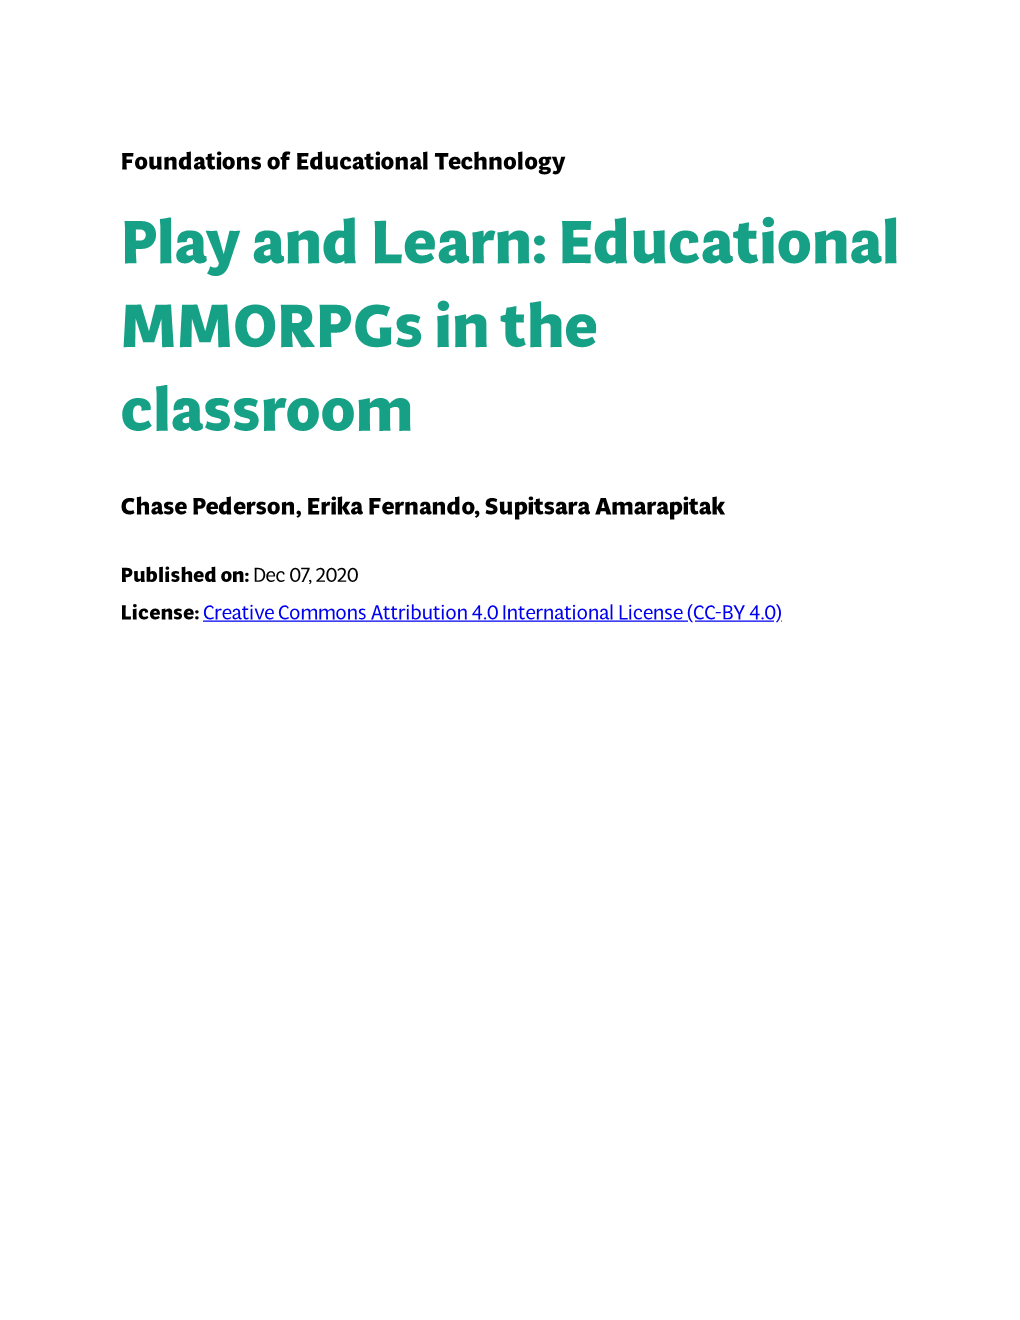 Play and Learn: Educational Mmorpgs in the Classroom